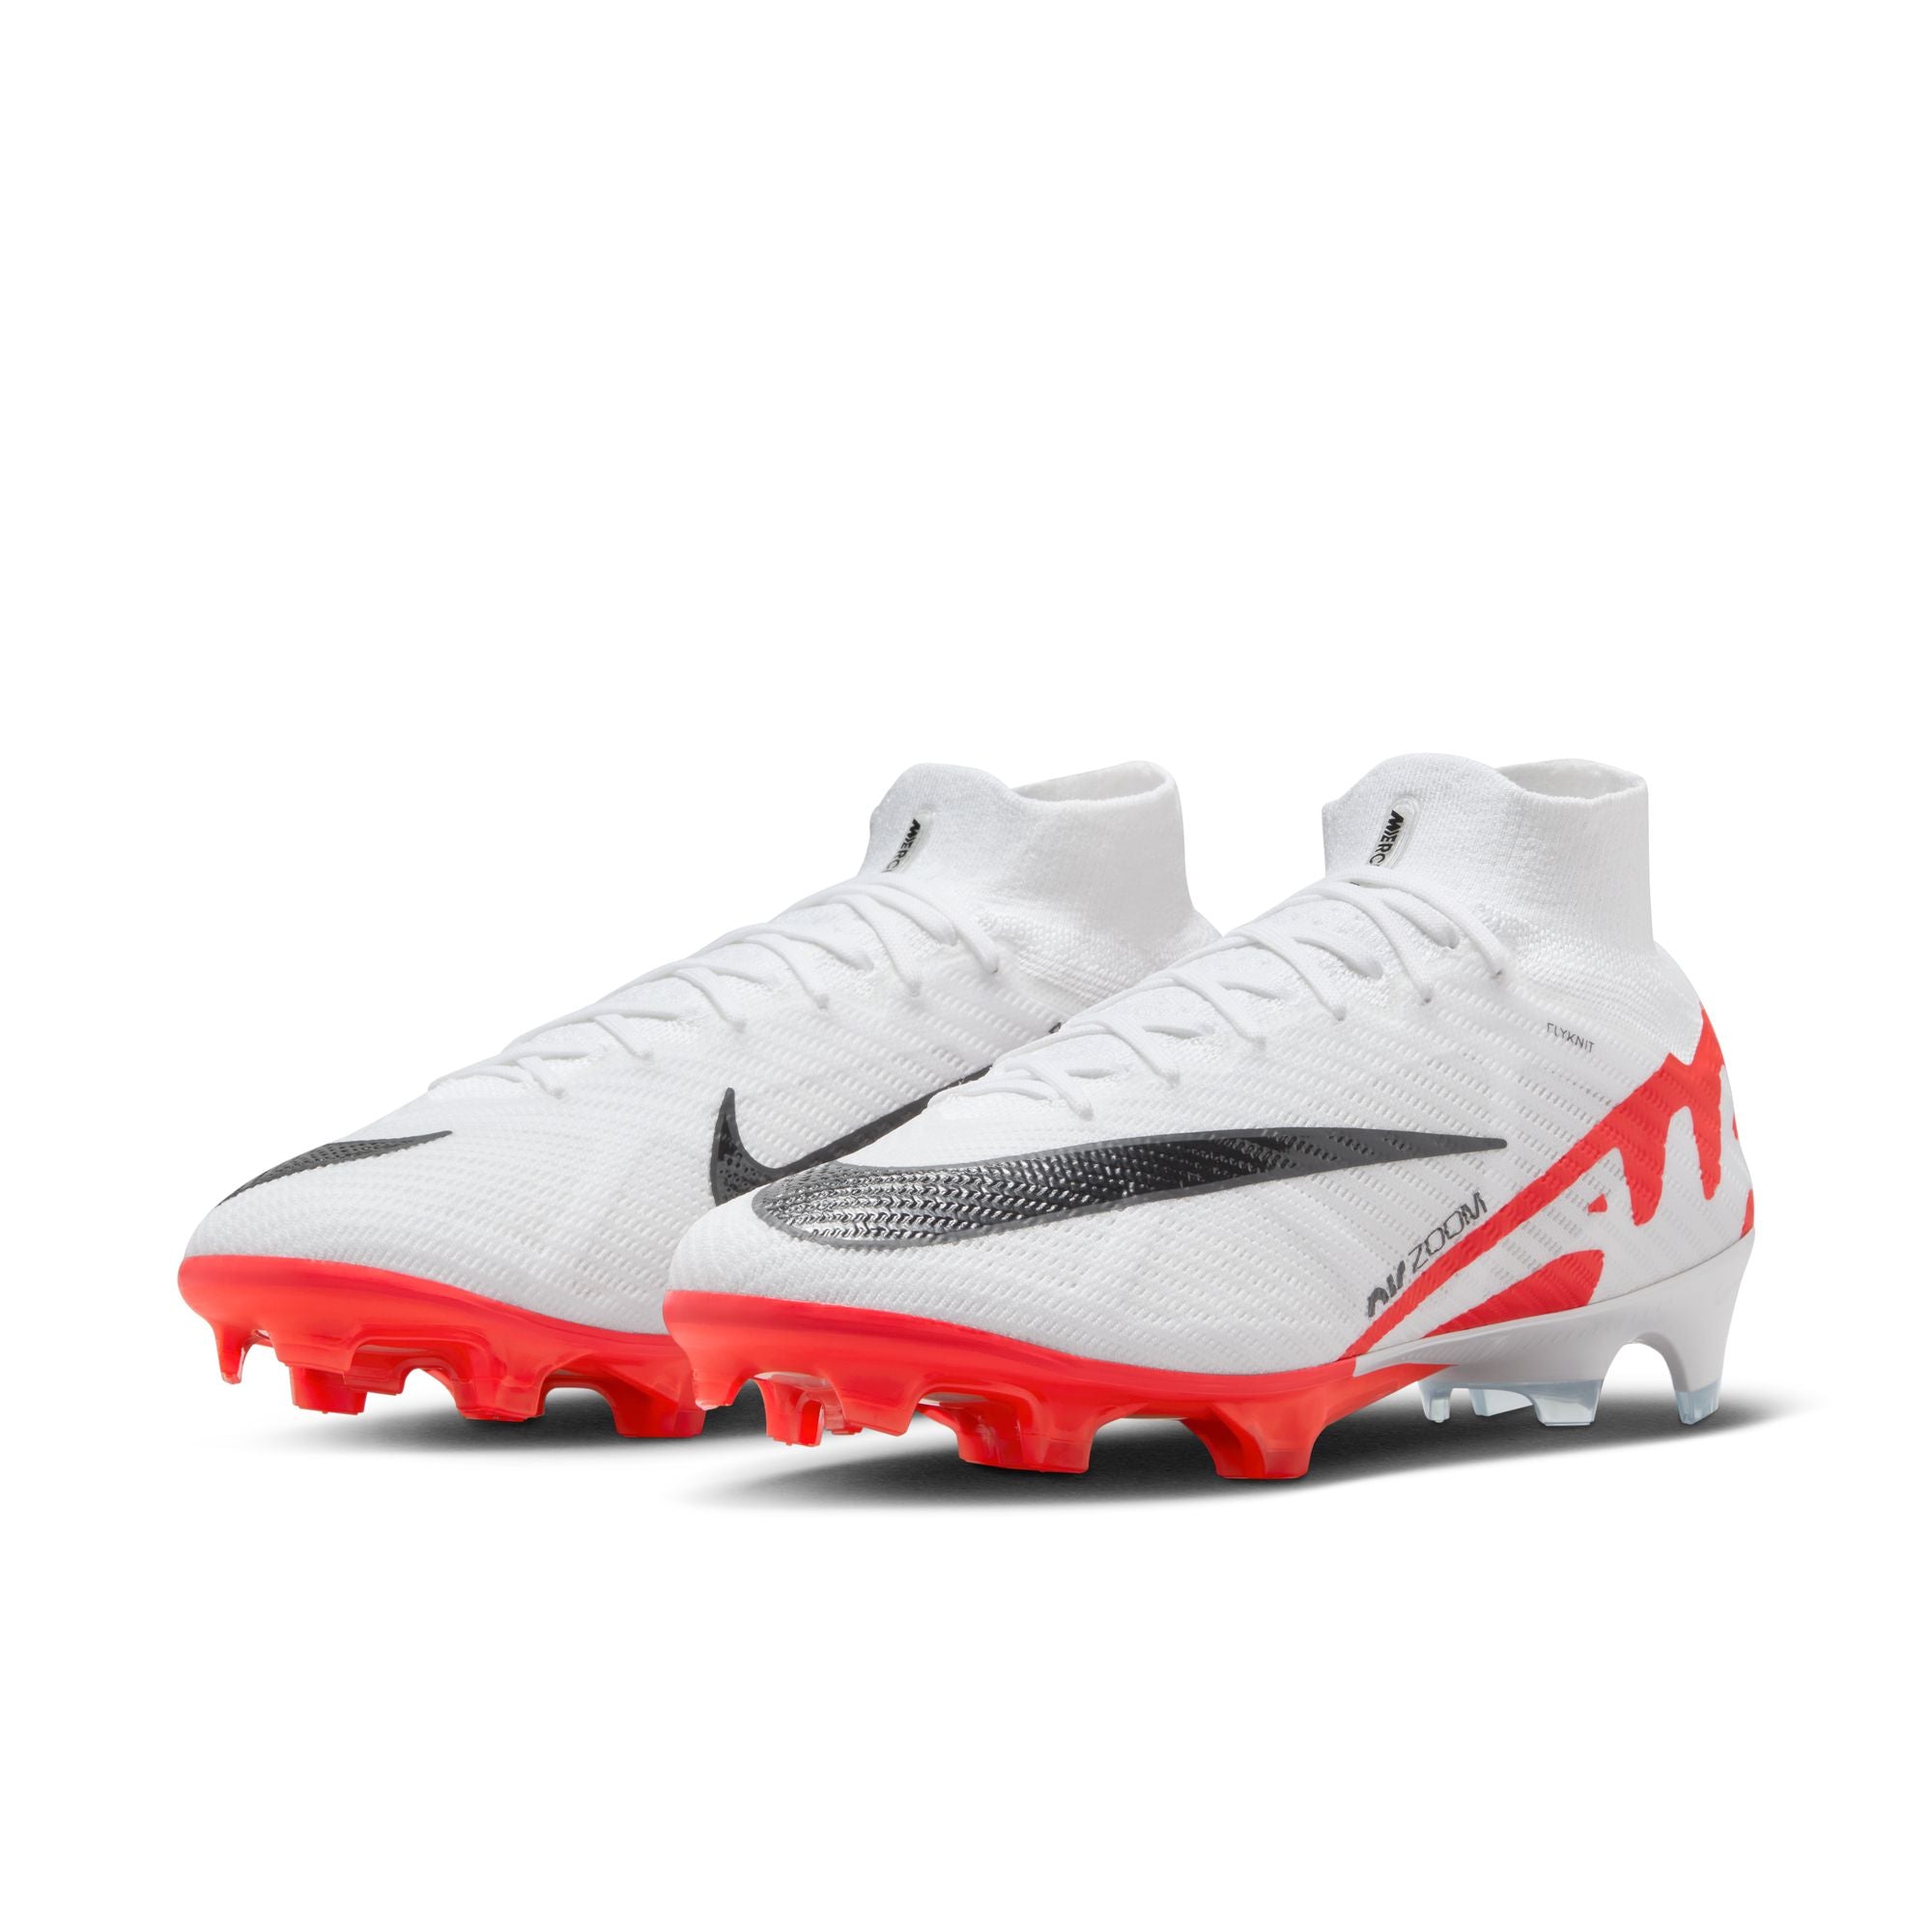 Customized soccer cleats Archives - Soccer Cleats 101